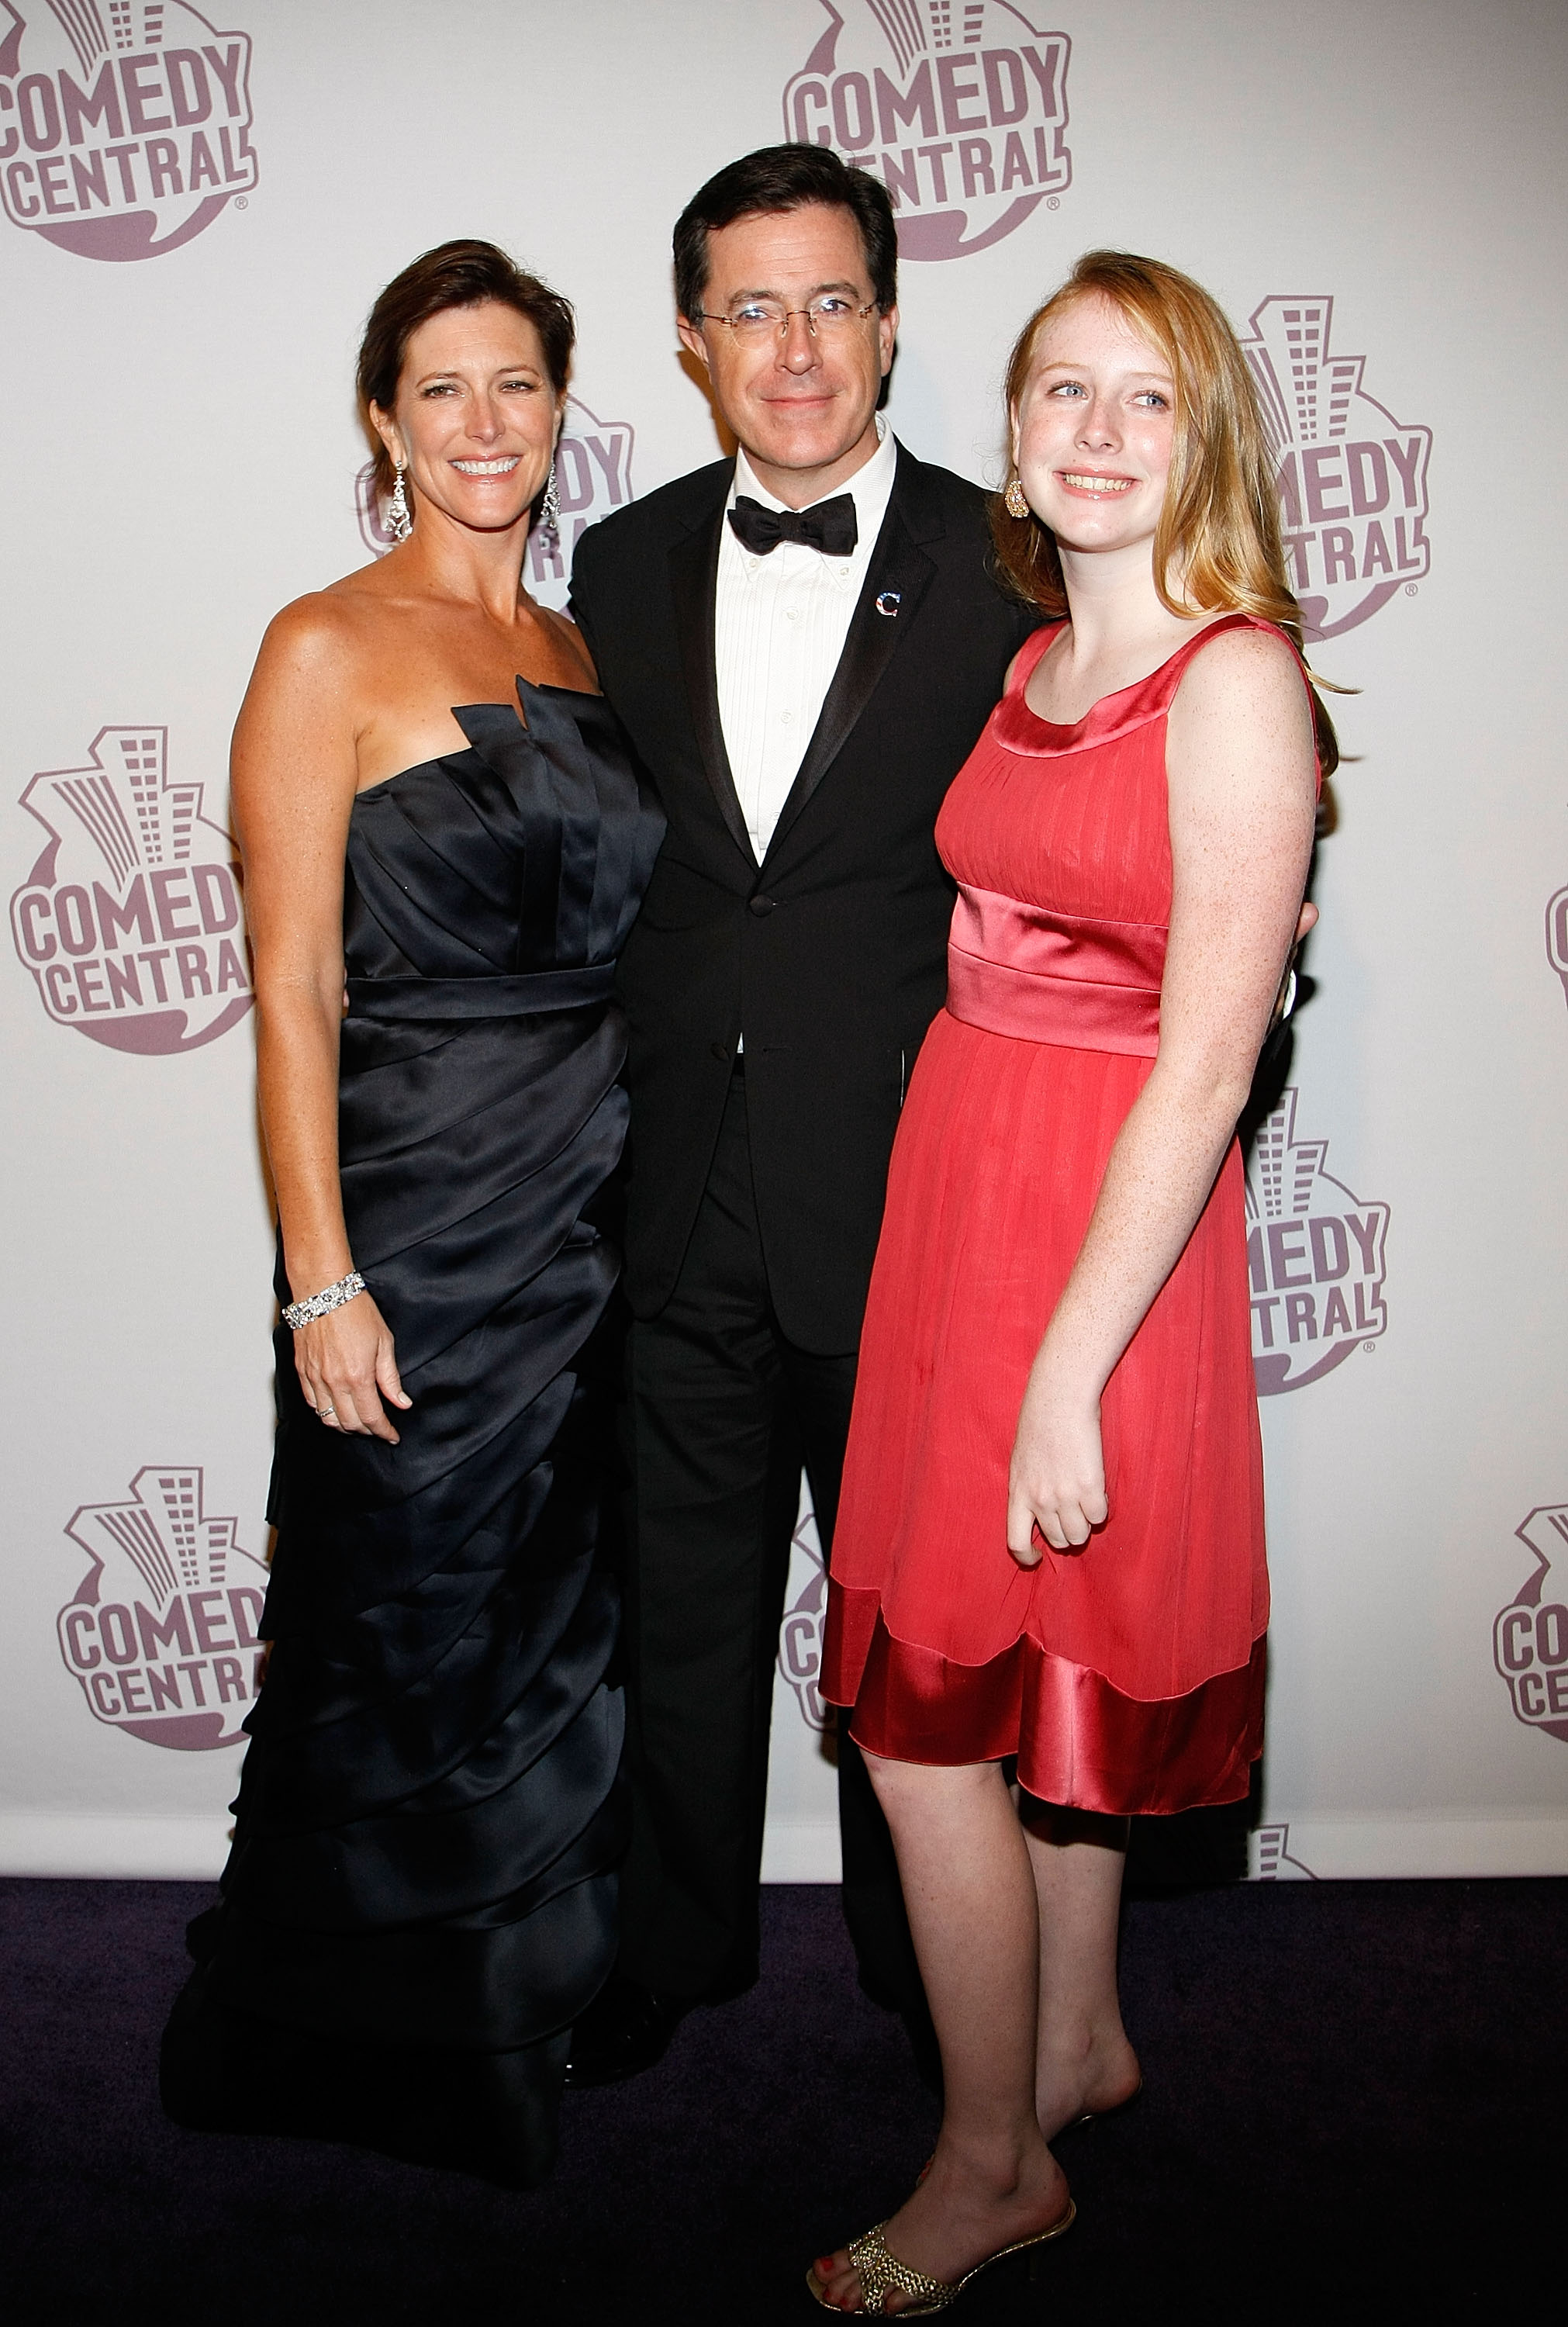 Stephen Colbert (C), his wife Evie Colbert (L) and daughter Madeleine Colbert (R) arrive at Comedy Central's Emmy Awards party at the STK restaurant September 21, 2008, in Los Angeles, California. | Source: Getty Images